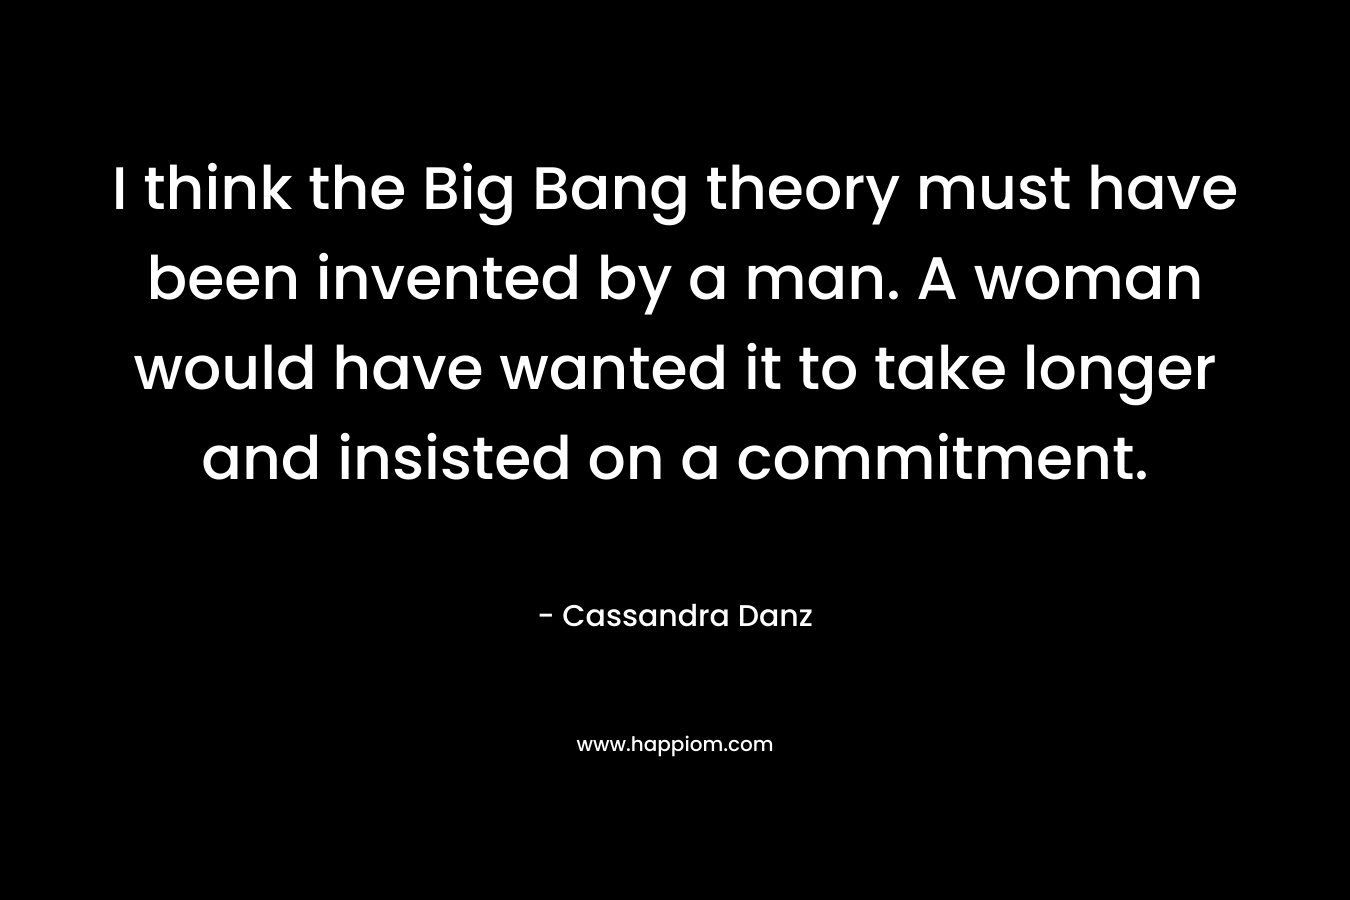 I think the Big Bang theory must have been invented by a man. A woman would have wanted it to take longer and insisted on a commitment.